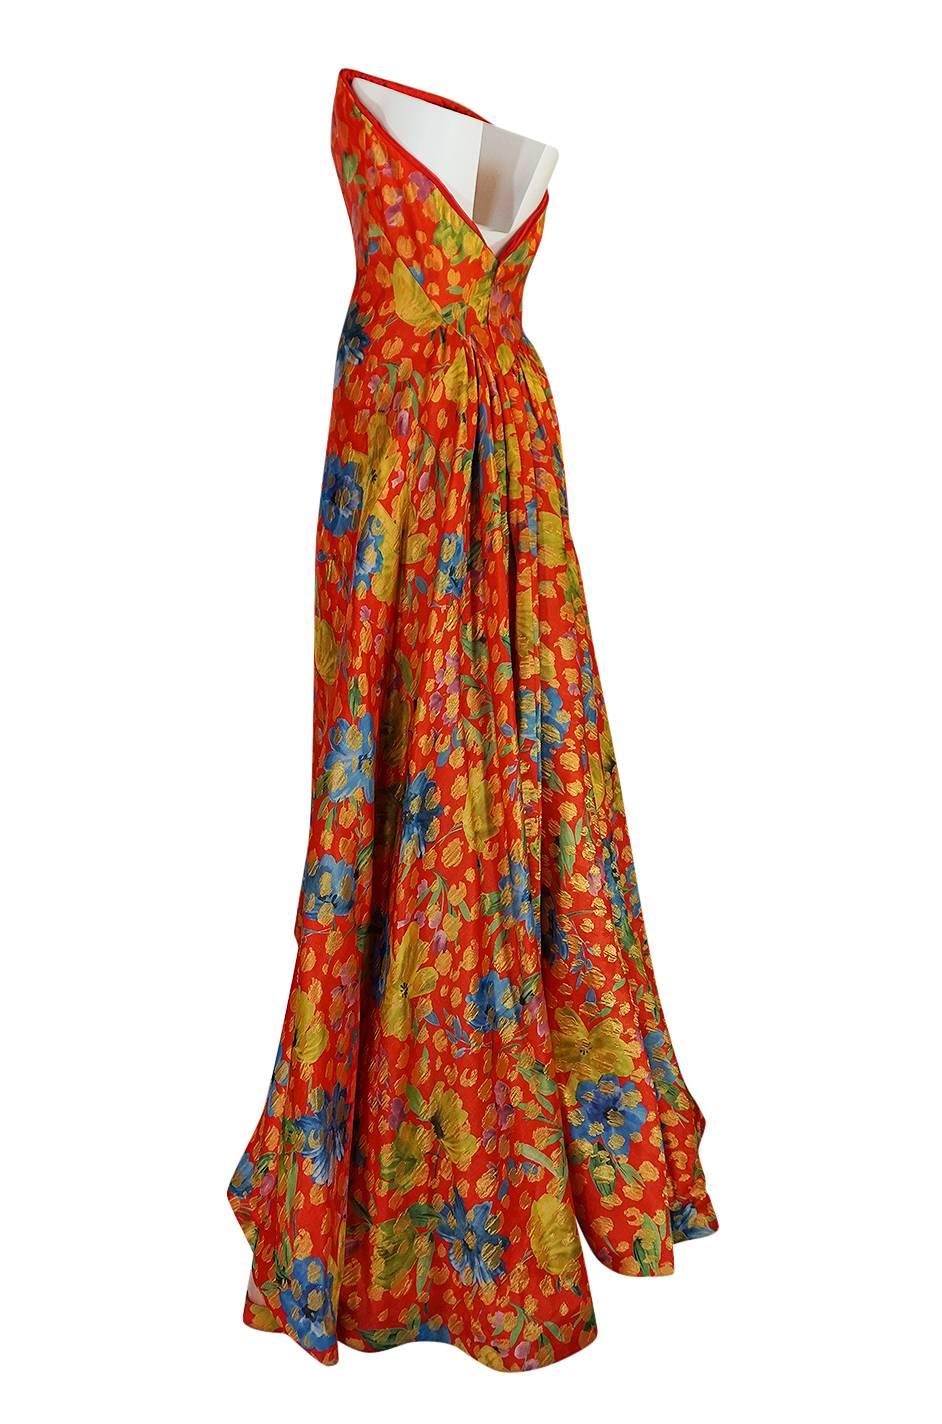 Women's Sully Bonnelly Red and Gold Floral Strapless Trained Dress, circa 1998